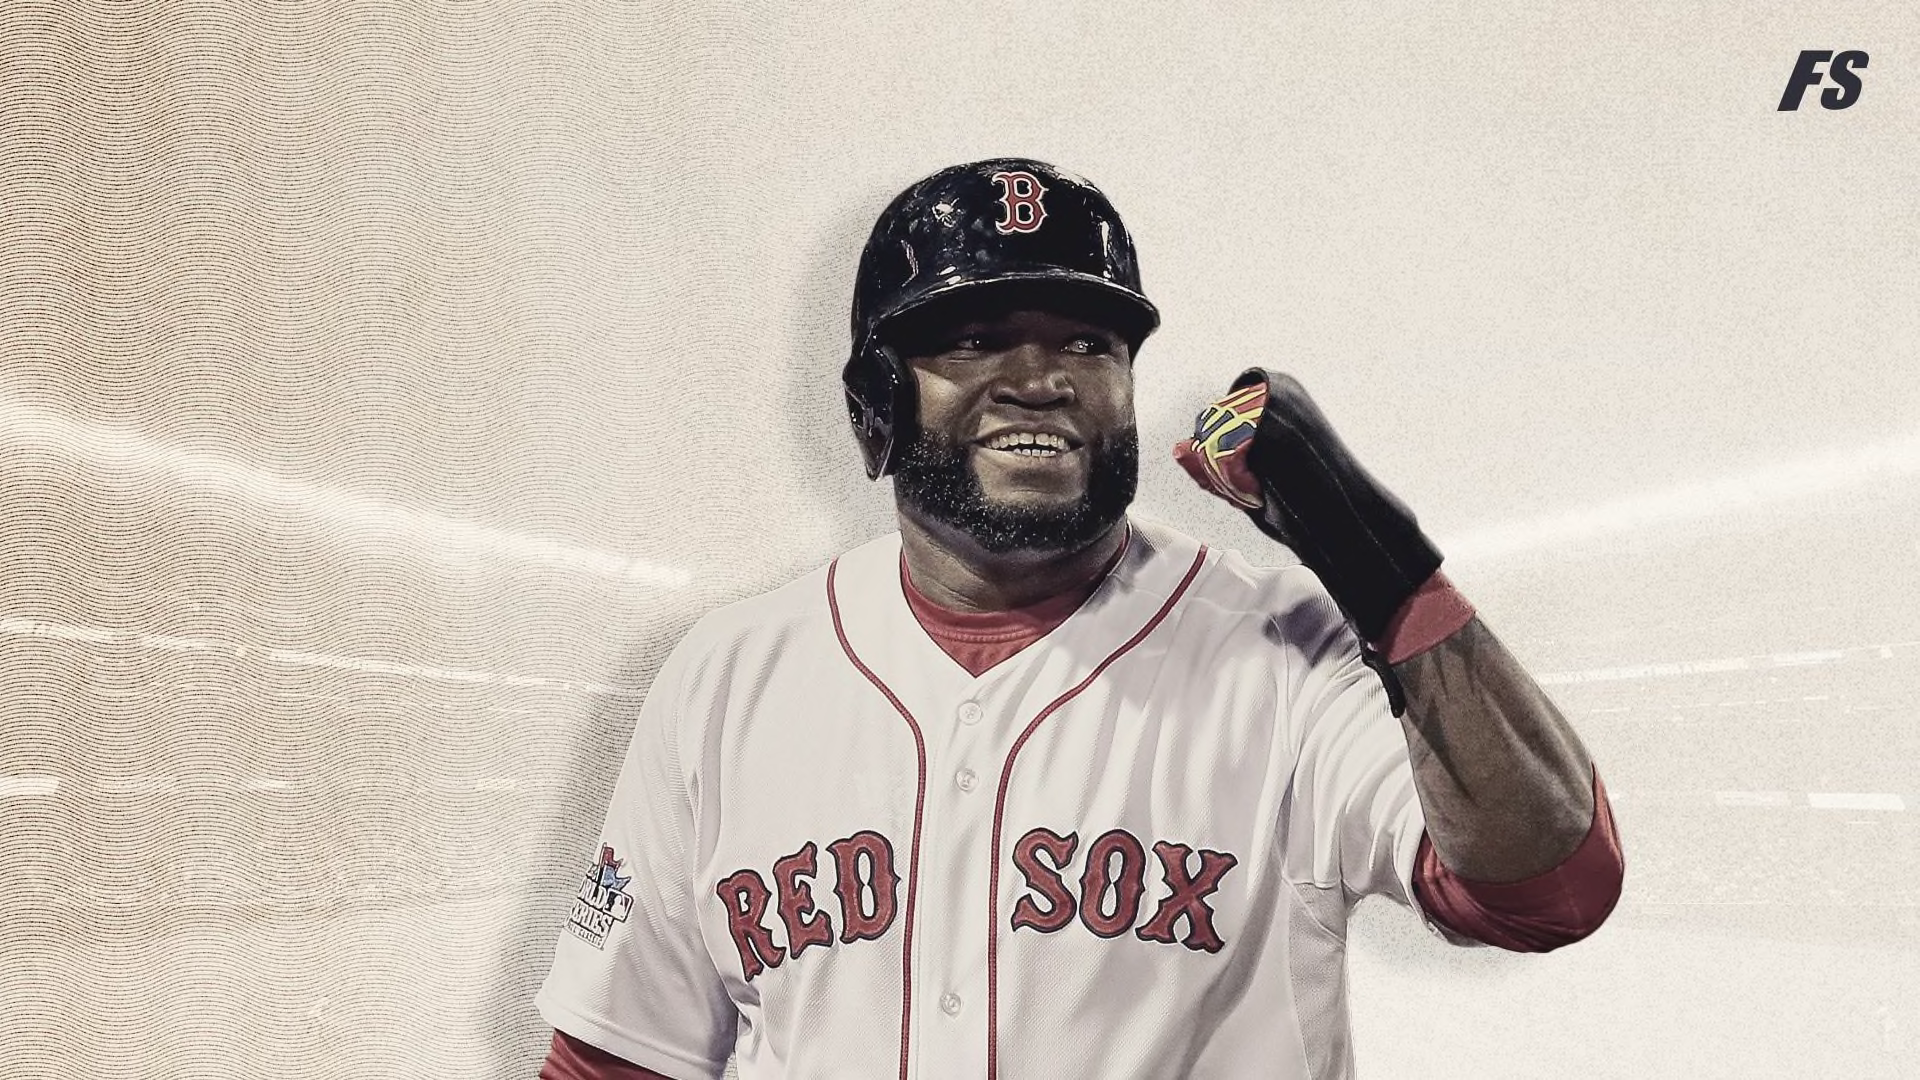 David Ortiz, elected to the 2022 FanSided Mock Baseball Hall of Fame